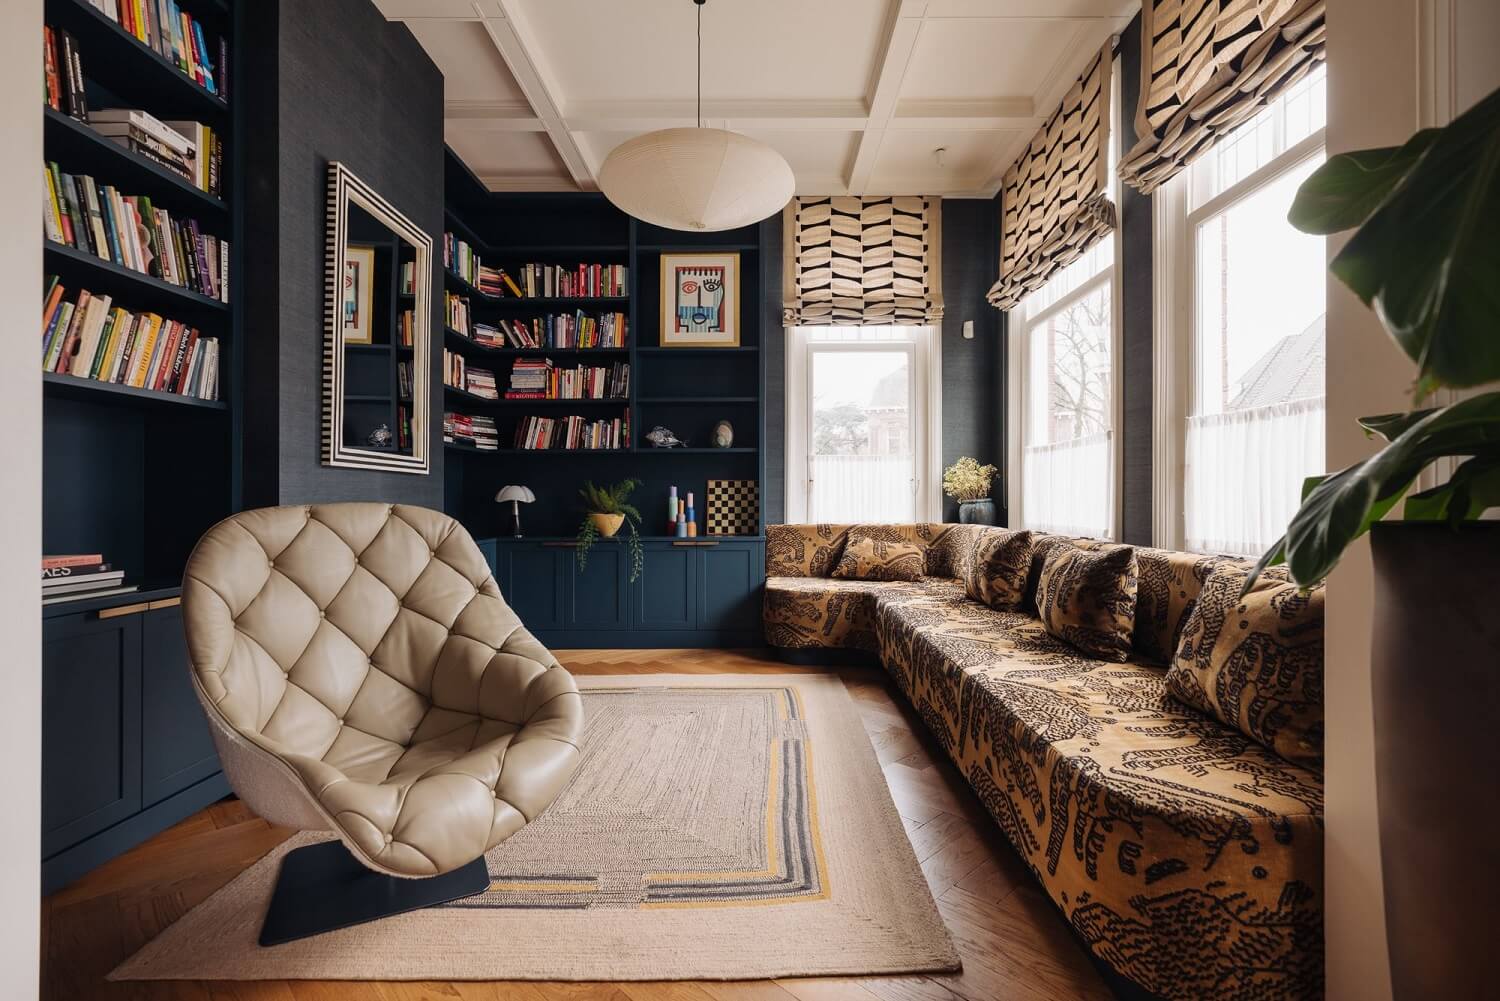 reading-room-blue-bookcases-built-in-couch-mix-match-textures-patterns-nordroom